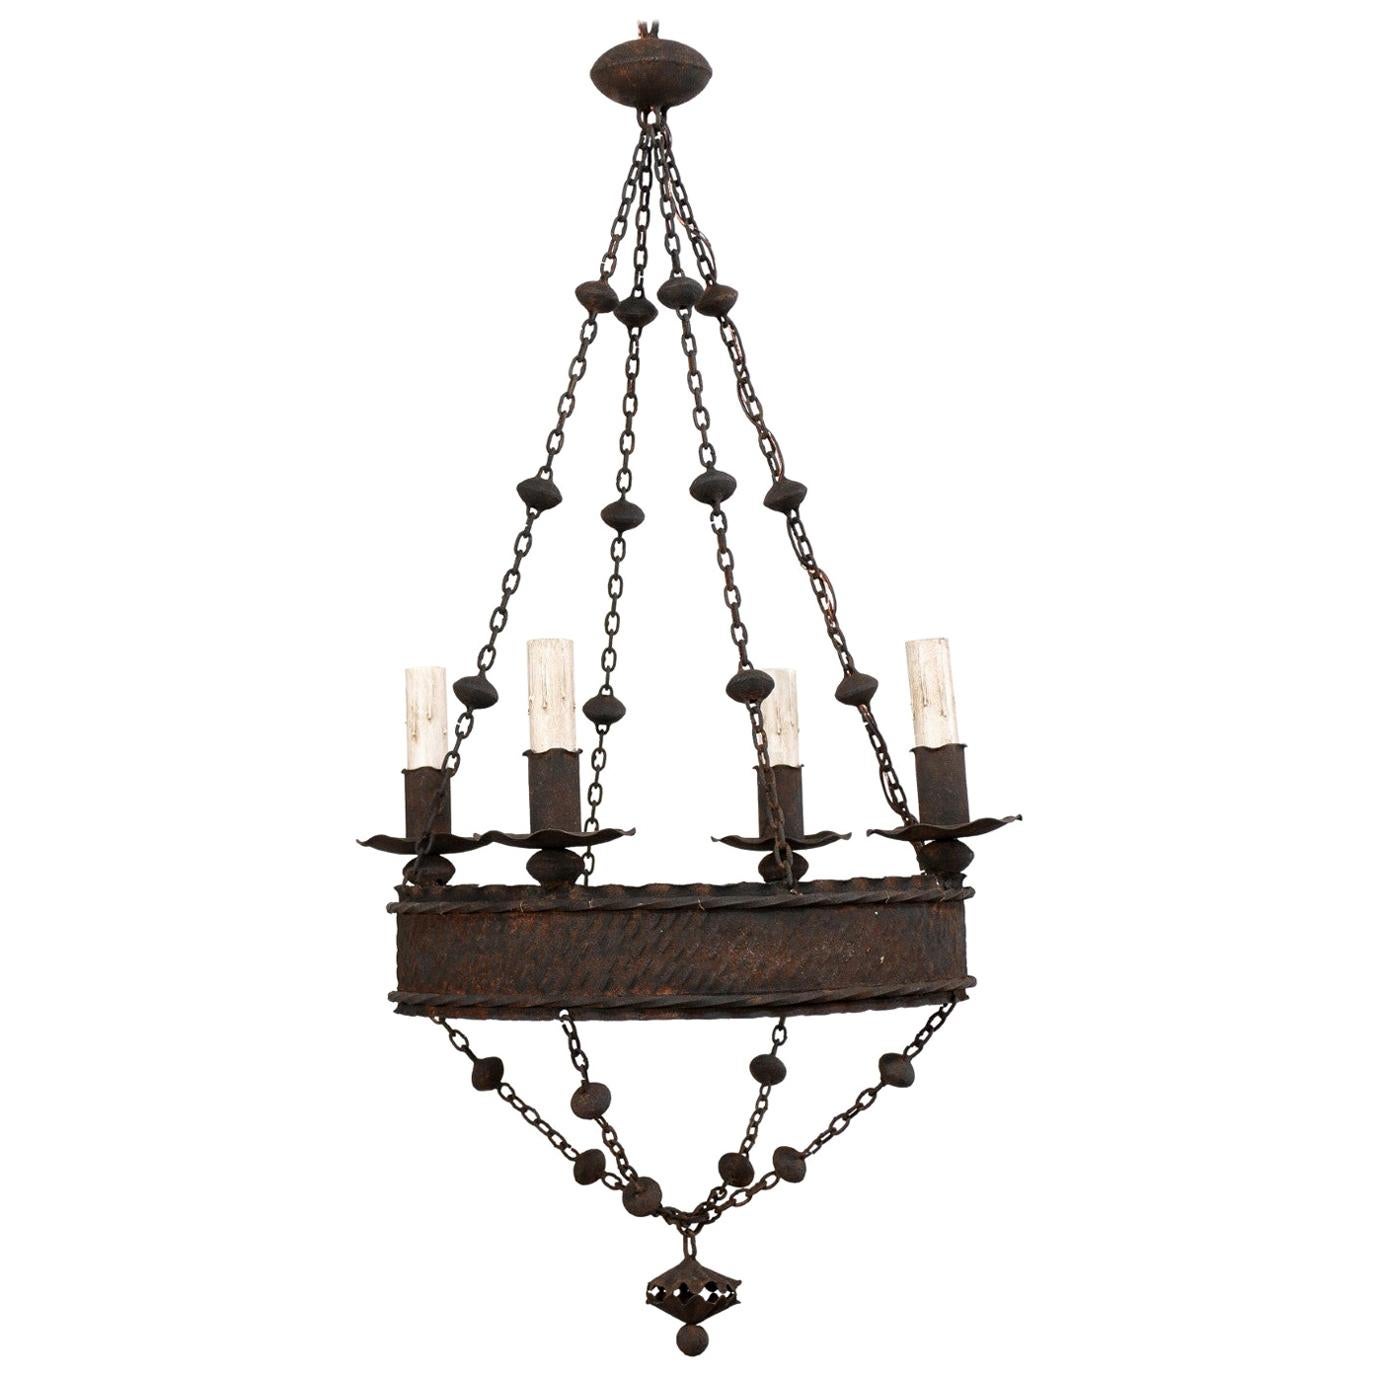 French Iron Basket-Style Four-Light Chandelier from the Mid-20th Century